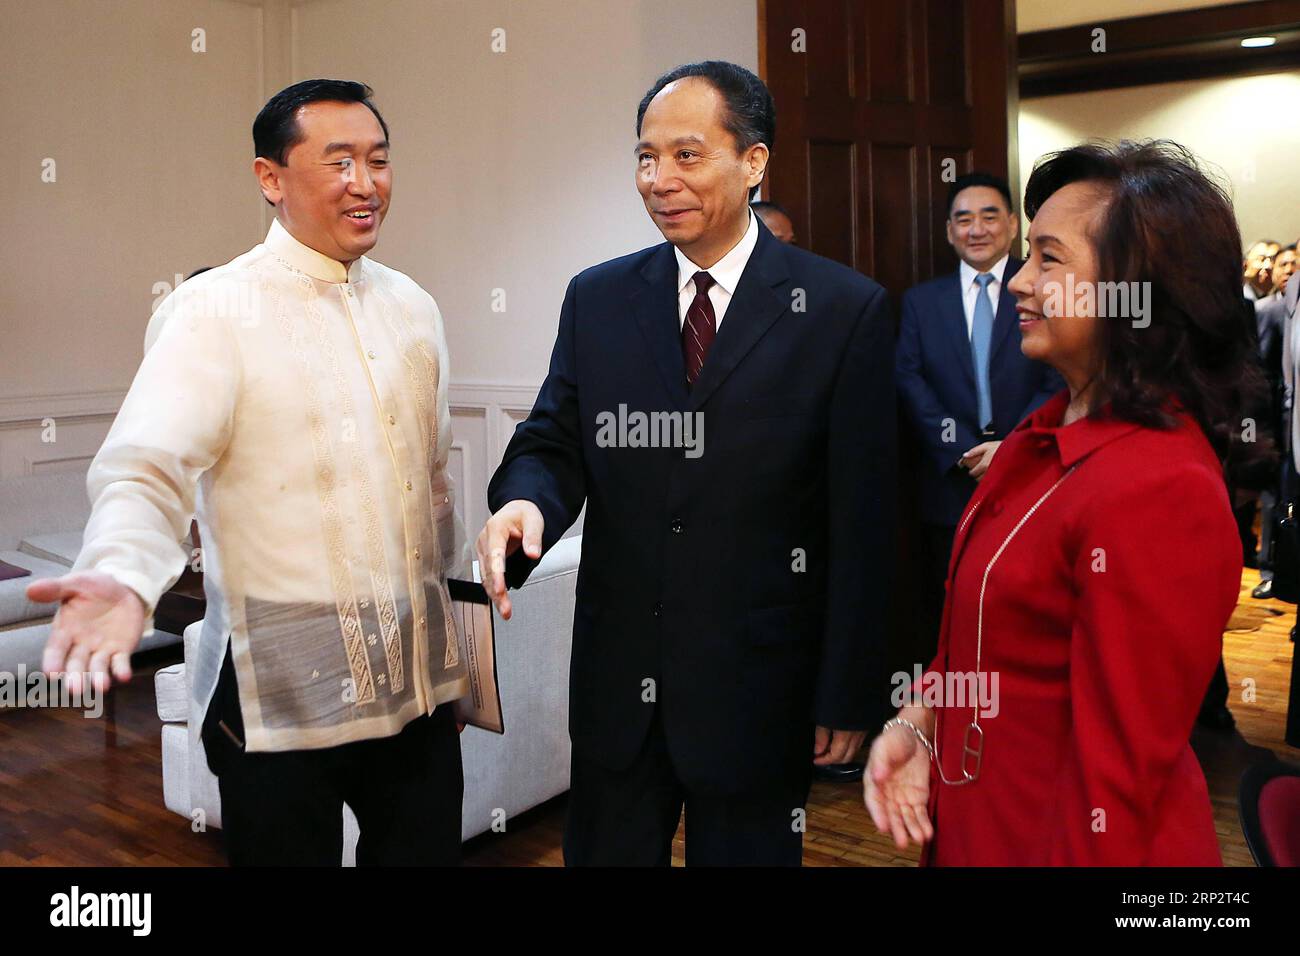 (180911) -- MANILA, Sept. 11, 2018 -- Ji Bingxuan (C), vice chairman of the Standing Committee of the National People s Congress of China, meets with Gloria Arroyo (R), Philippine Speaker of the House of Representatives, and Arthur Yap (L), Philippine Deputy Speaker of the House of Representatives, in Manila, the Philippines, Sept. 10, 2018. )(gj) THE PHILIPPINES-MANILA-JI BINGXUAN-VISITS RouellexUmali PUBLICATIONxNOTxINxCHN Stock Photo